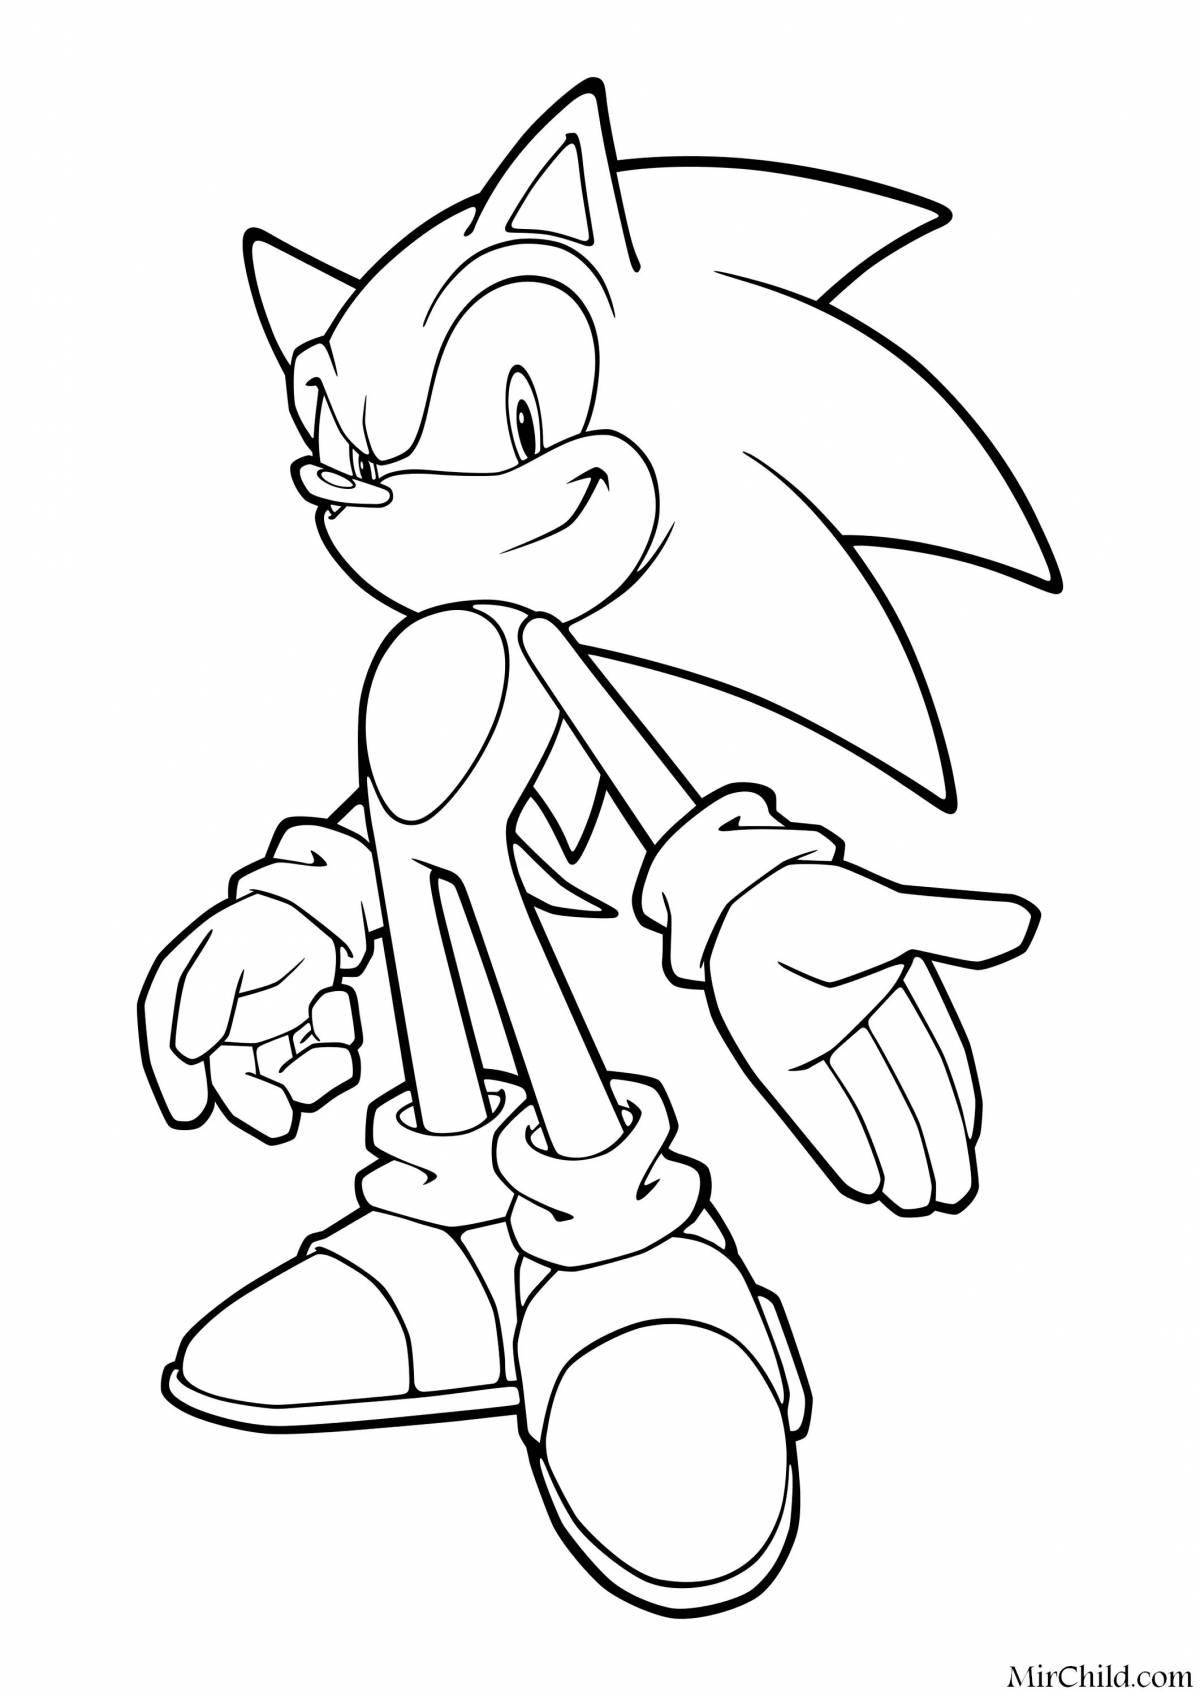 Animated yellow sonic coloring page